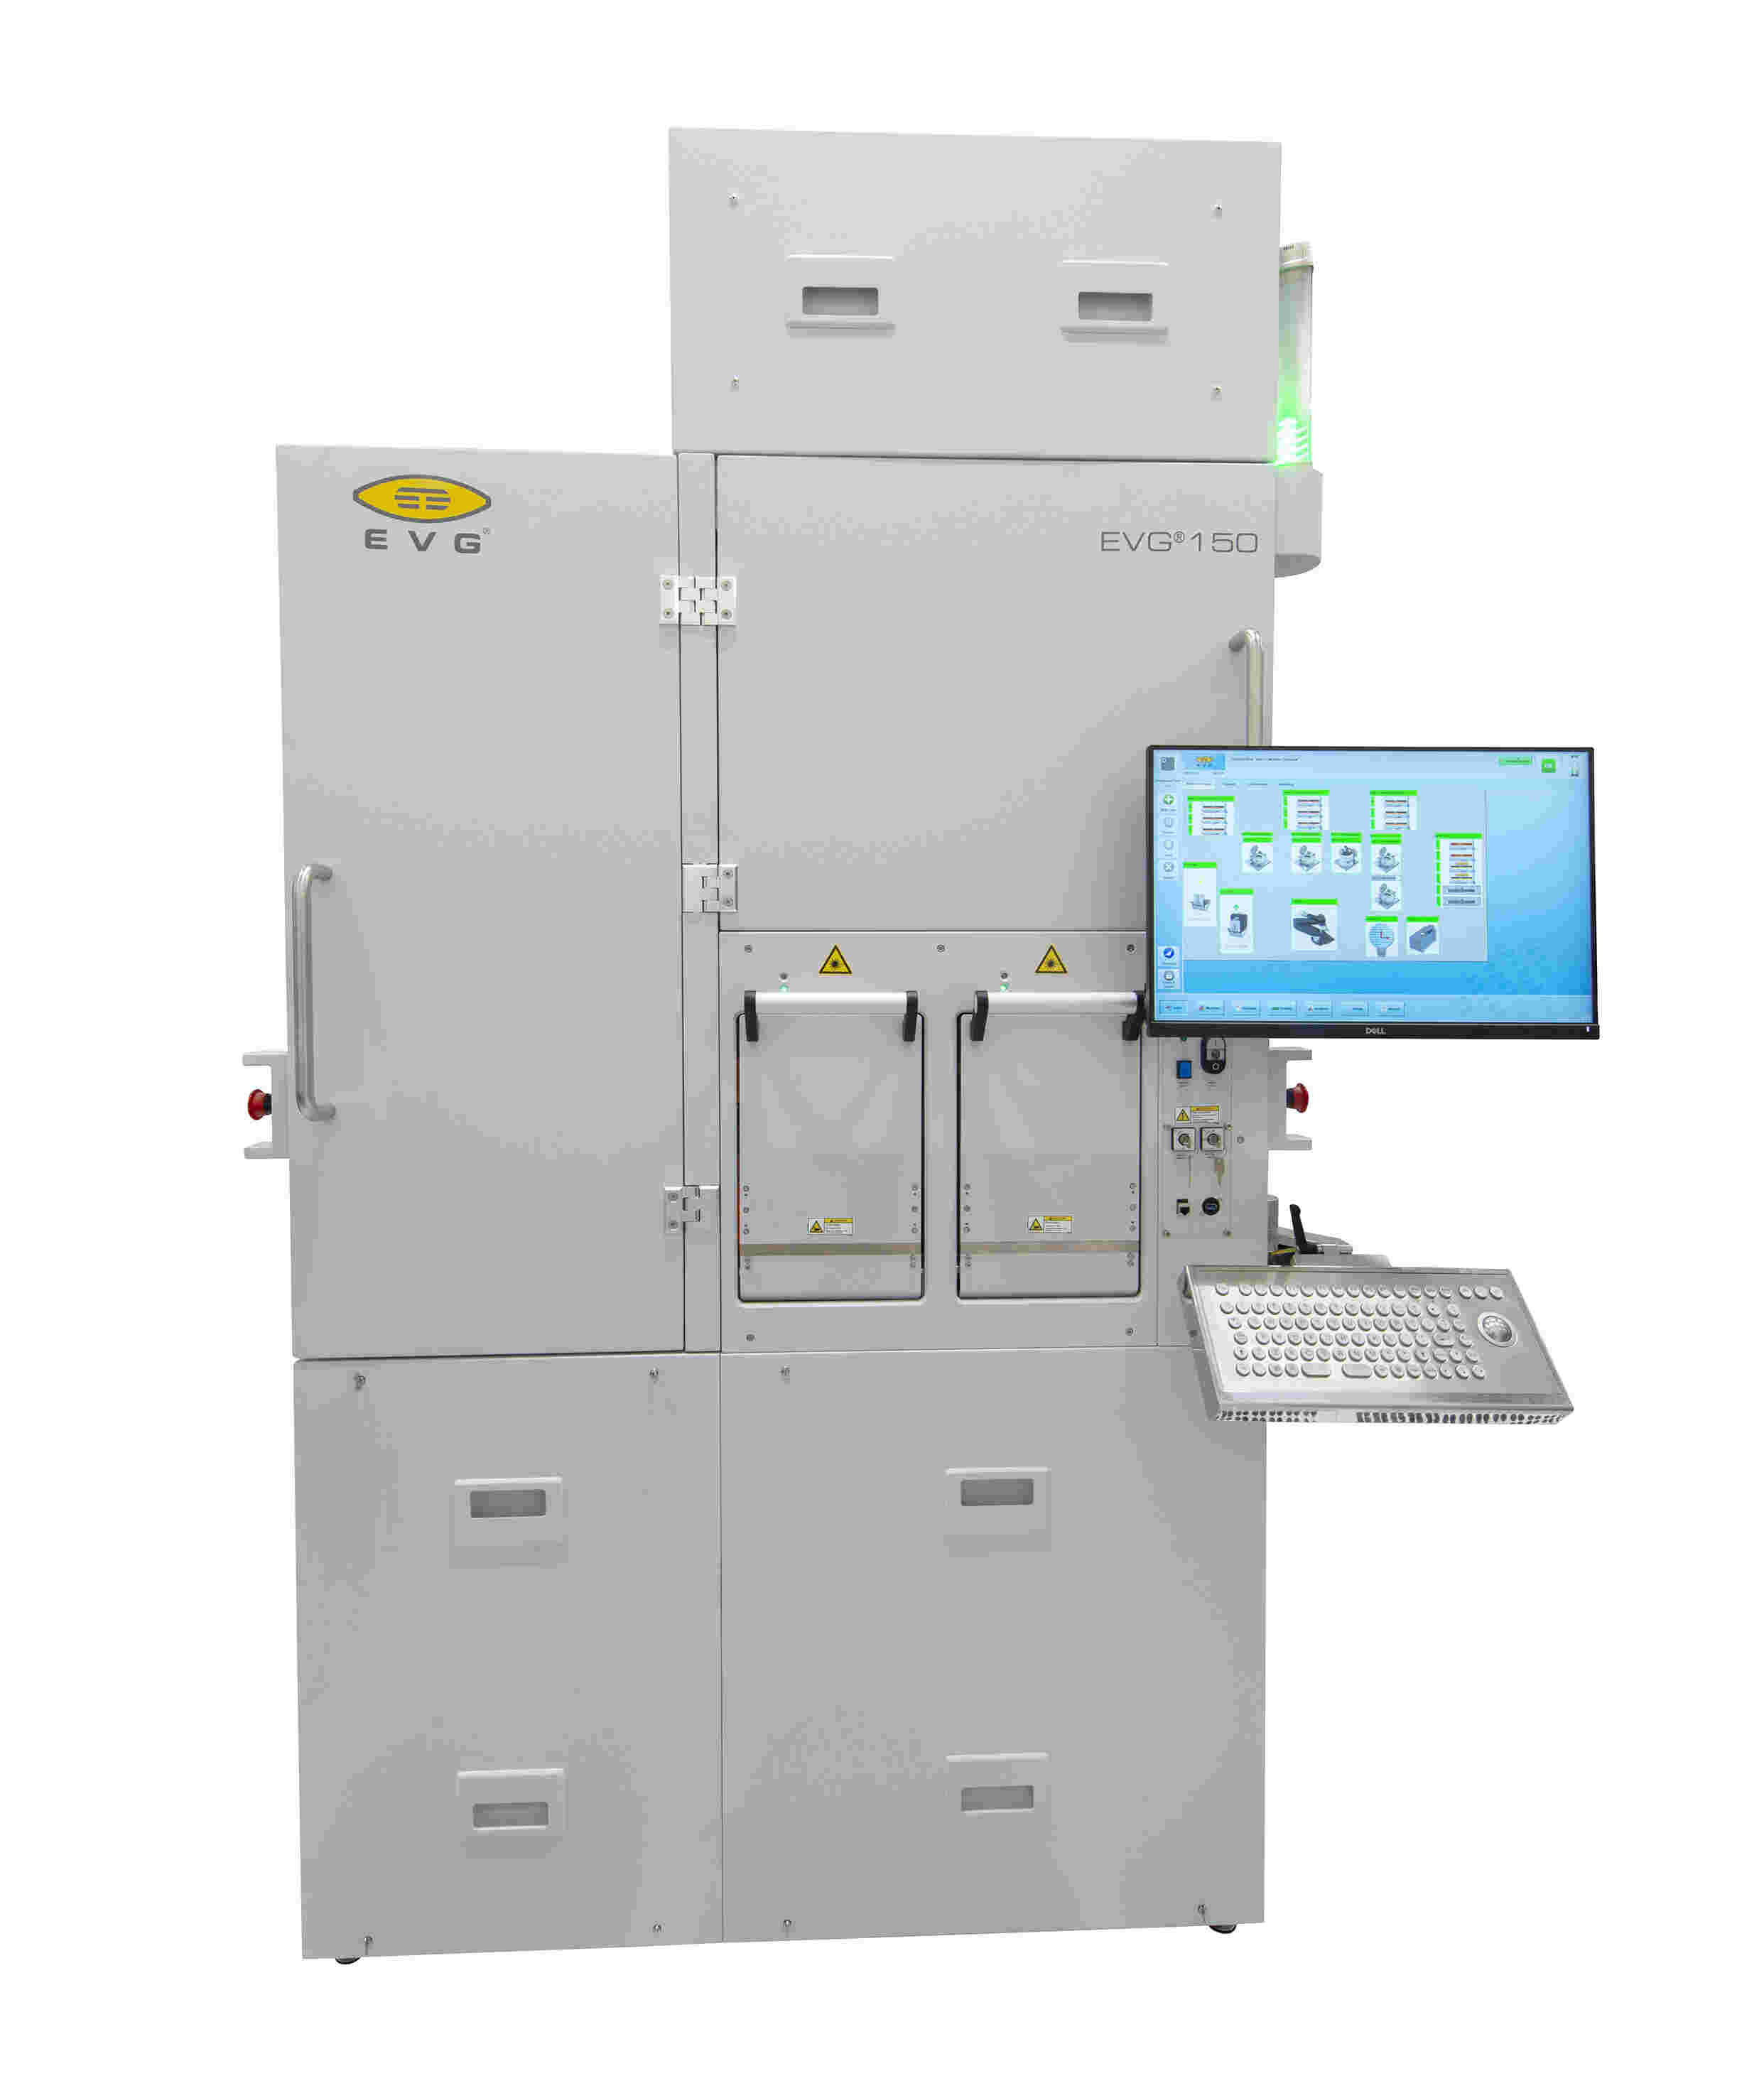 The next-generation EVG®150 automated resist processing system maintains the industry-leading capabilities of the previous-generation platform while adding advanced features and enhancements that provide even greater throughput (by up to 80 percent) and versatility, as well as smaller tool footprint (by nearly 50 percent). 